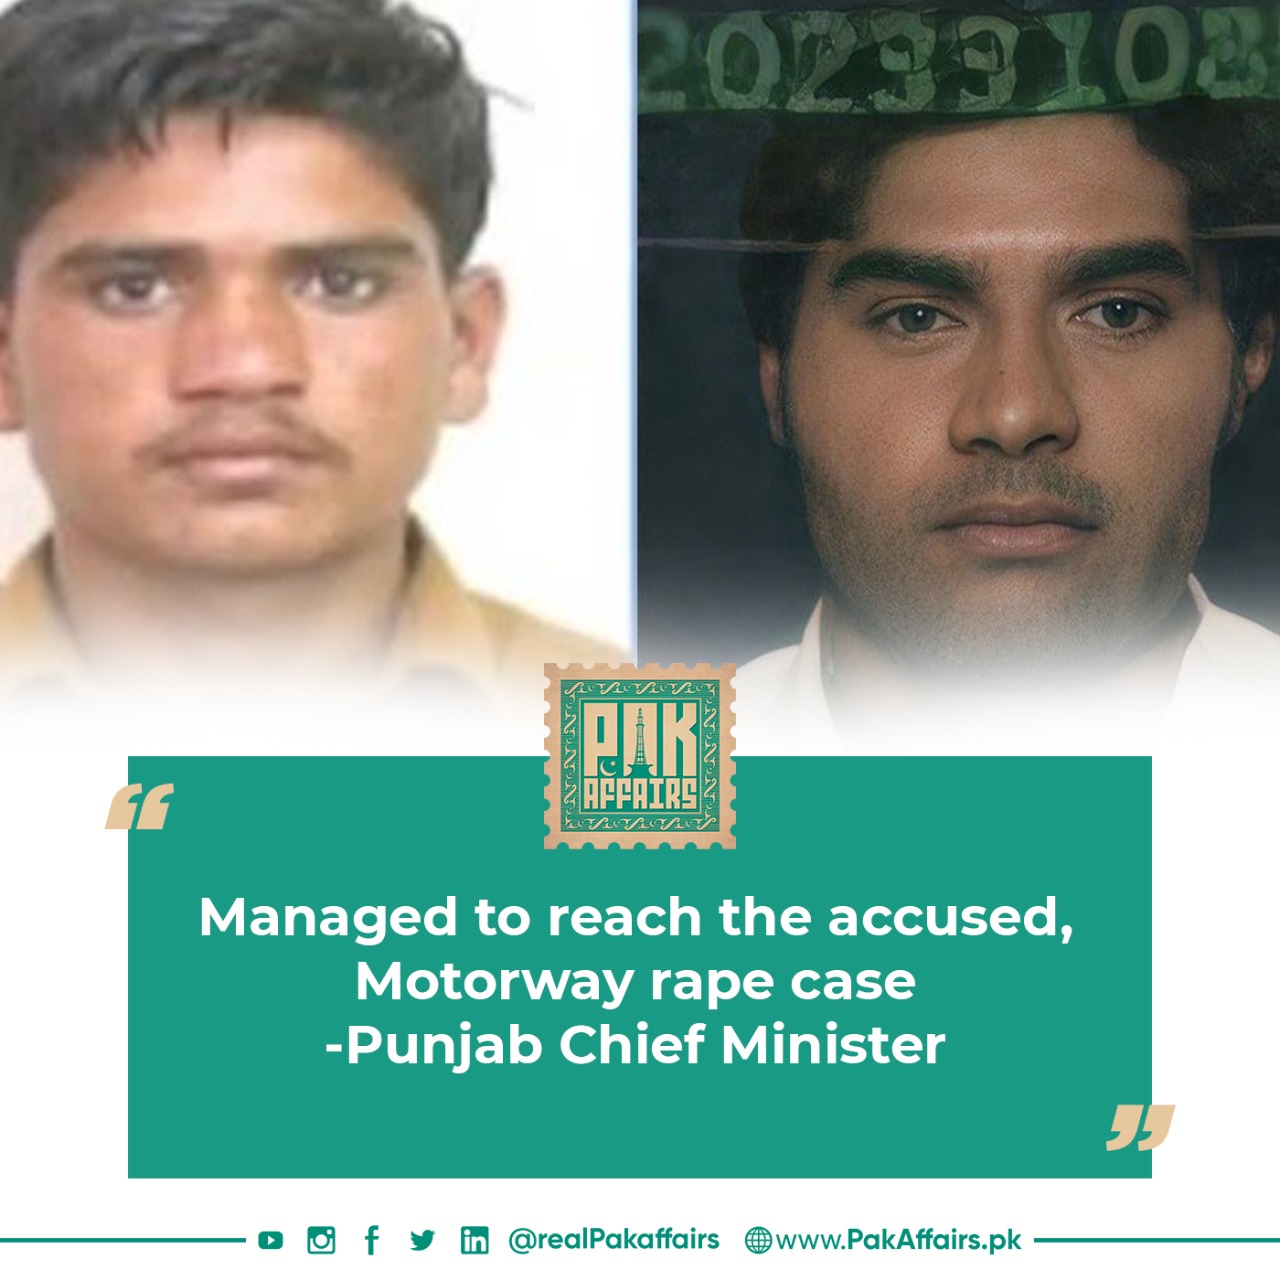 Managed to reach the accused, Motorway rape case: Punjab Chief Minister.